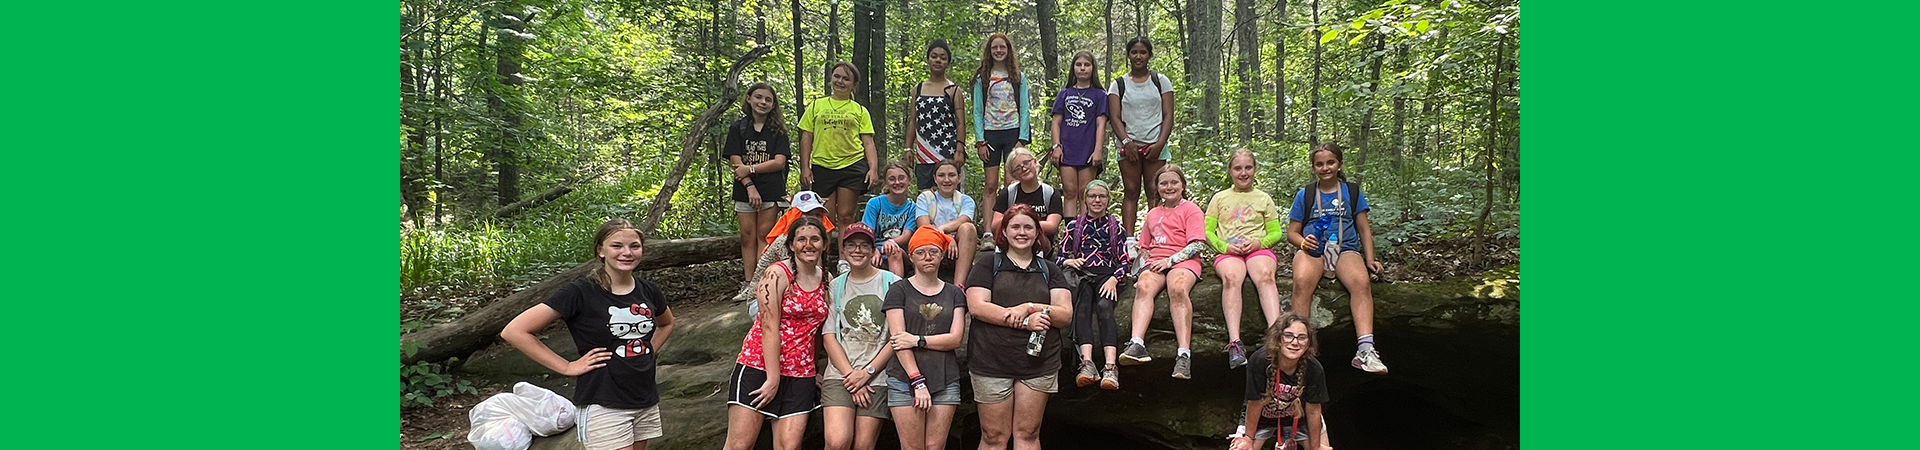  girl scouts posing together for a photo while on a hike in the woods 